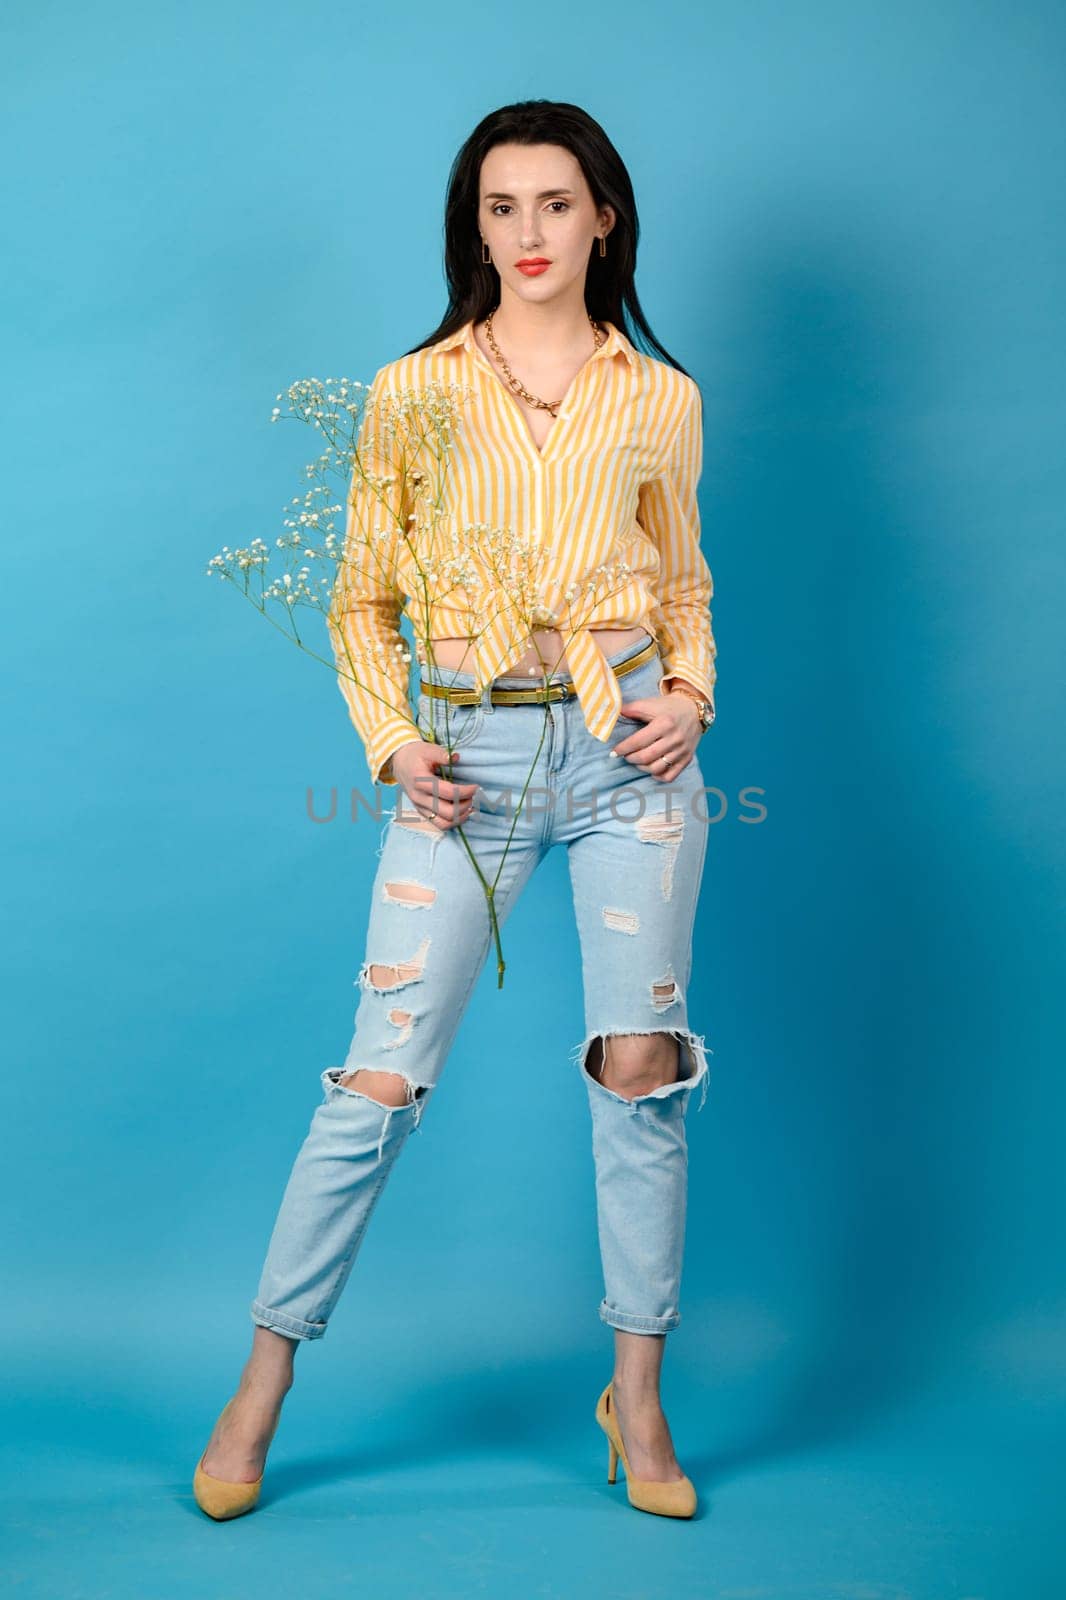 Brunette girl on blue background in blue jeans and yellow shirt, brunette girl with long hair, copy space.